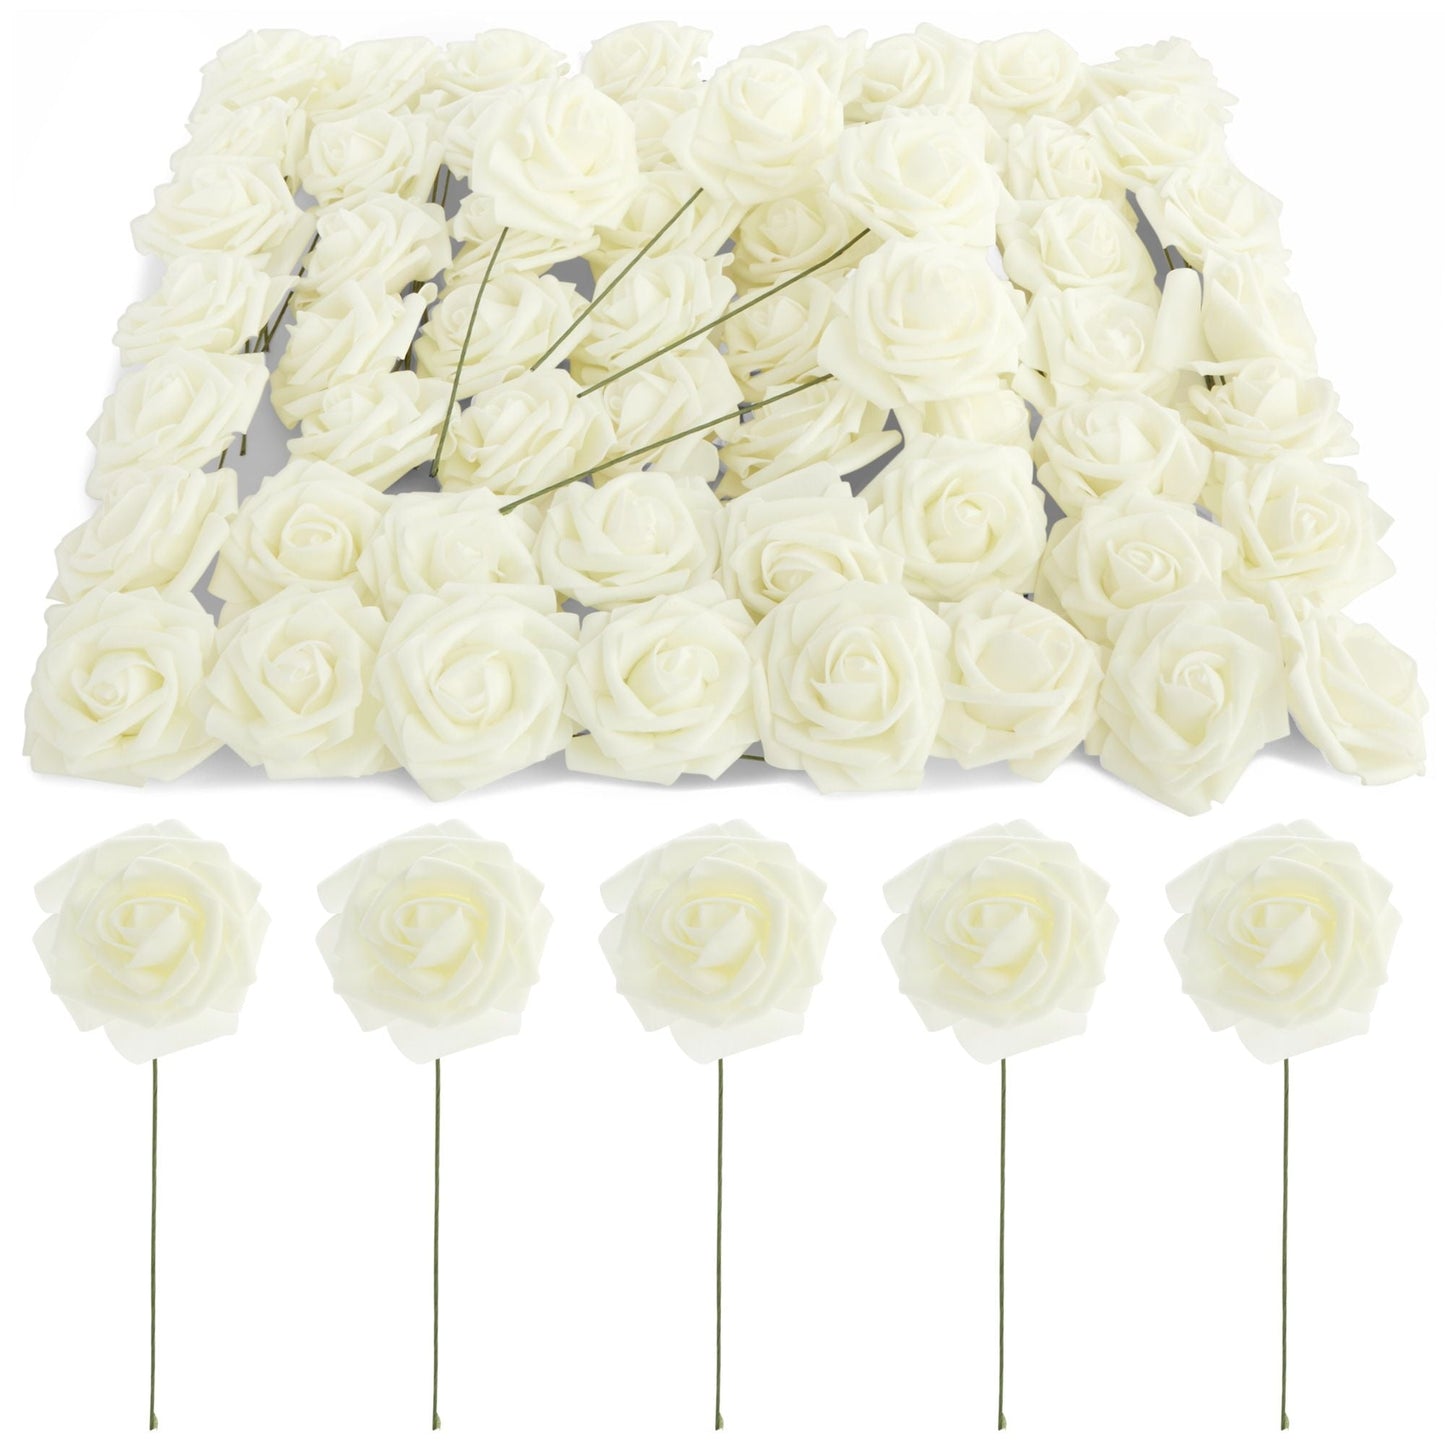 60 Pack White Artificial Roses with Stems, Fake Faux Flowers Heads Bulk for Wedding Bouquets DIY & Bridal Shower, Cream, 3 inch